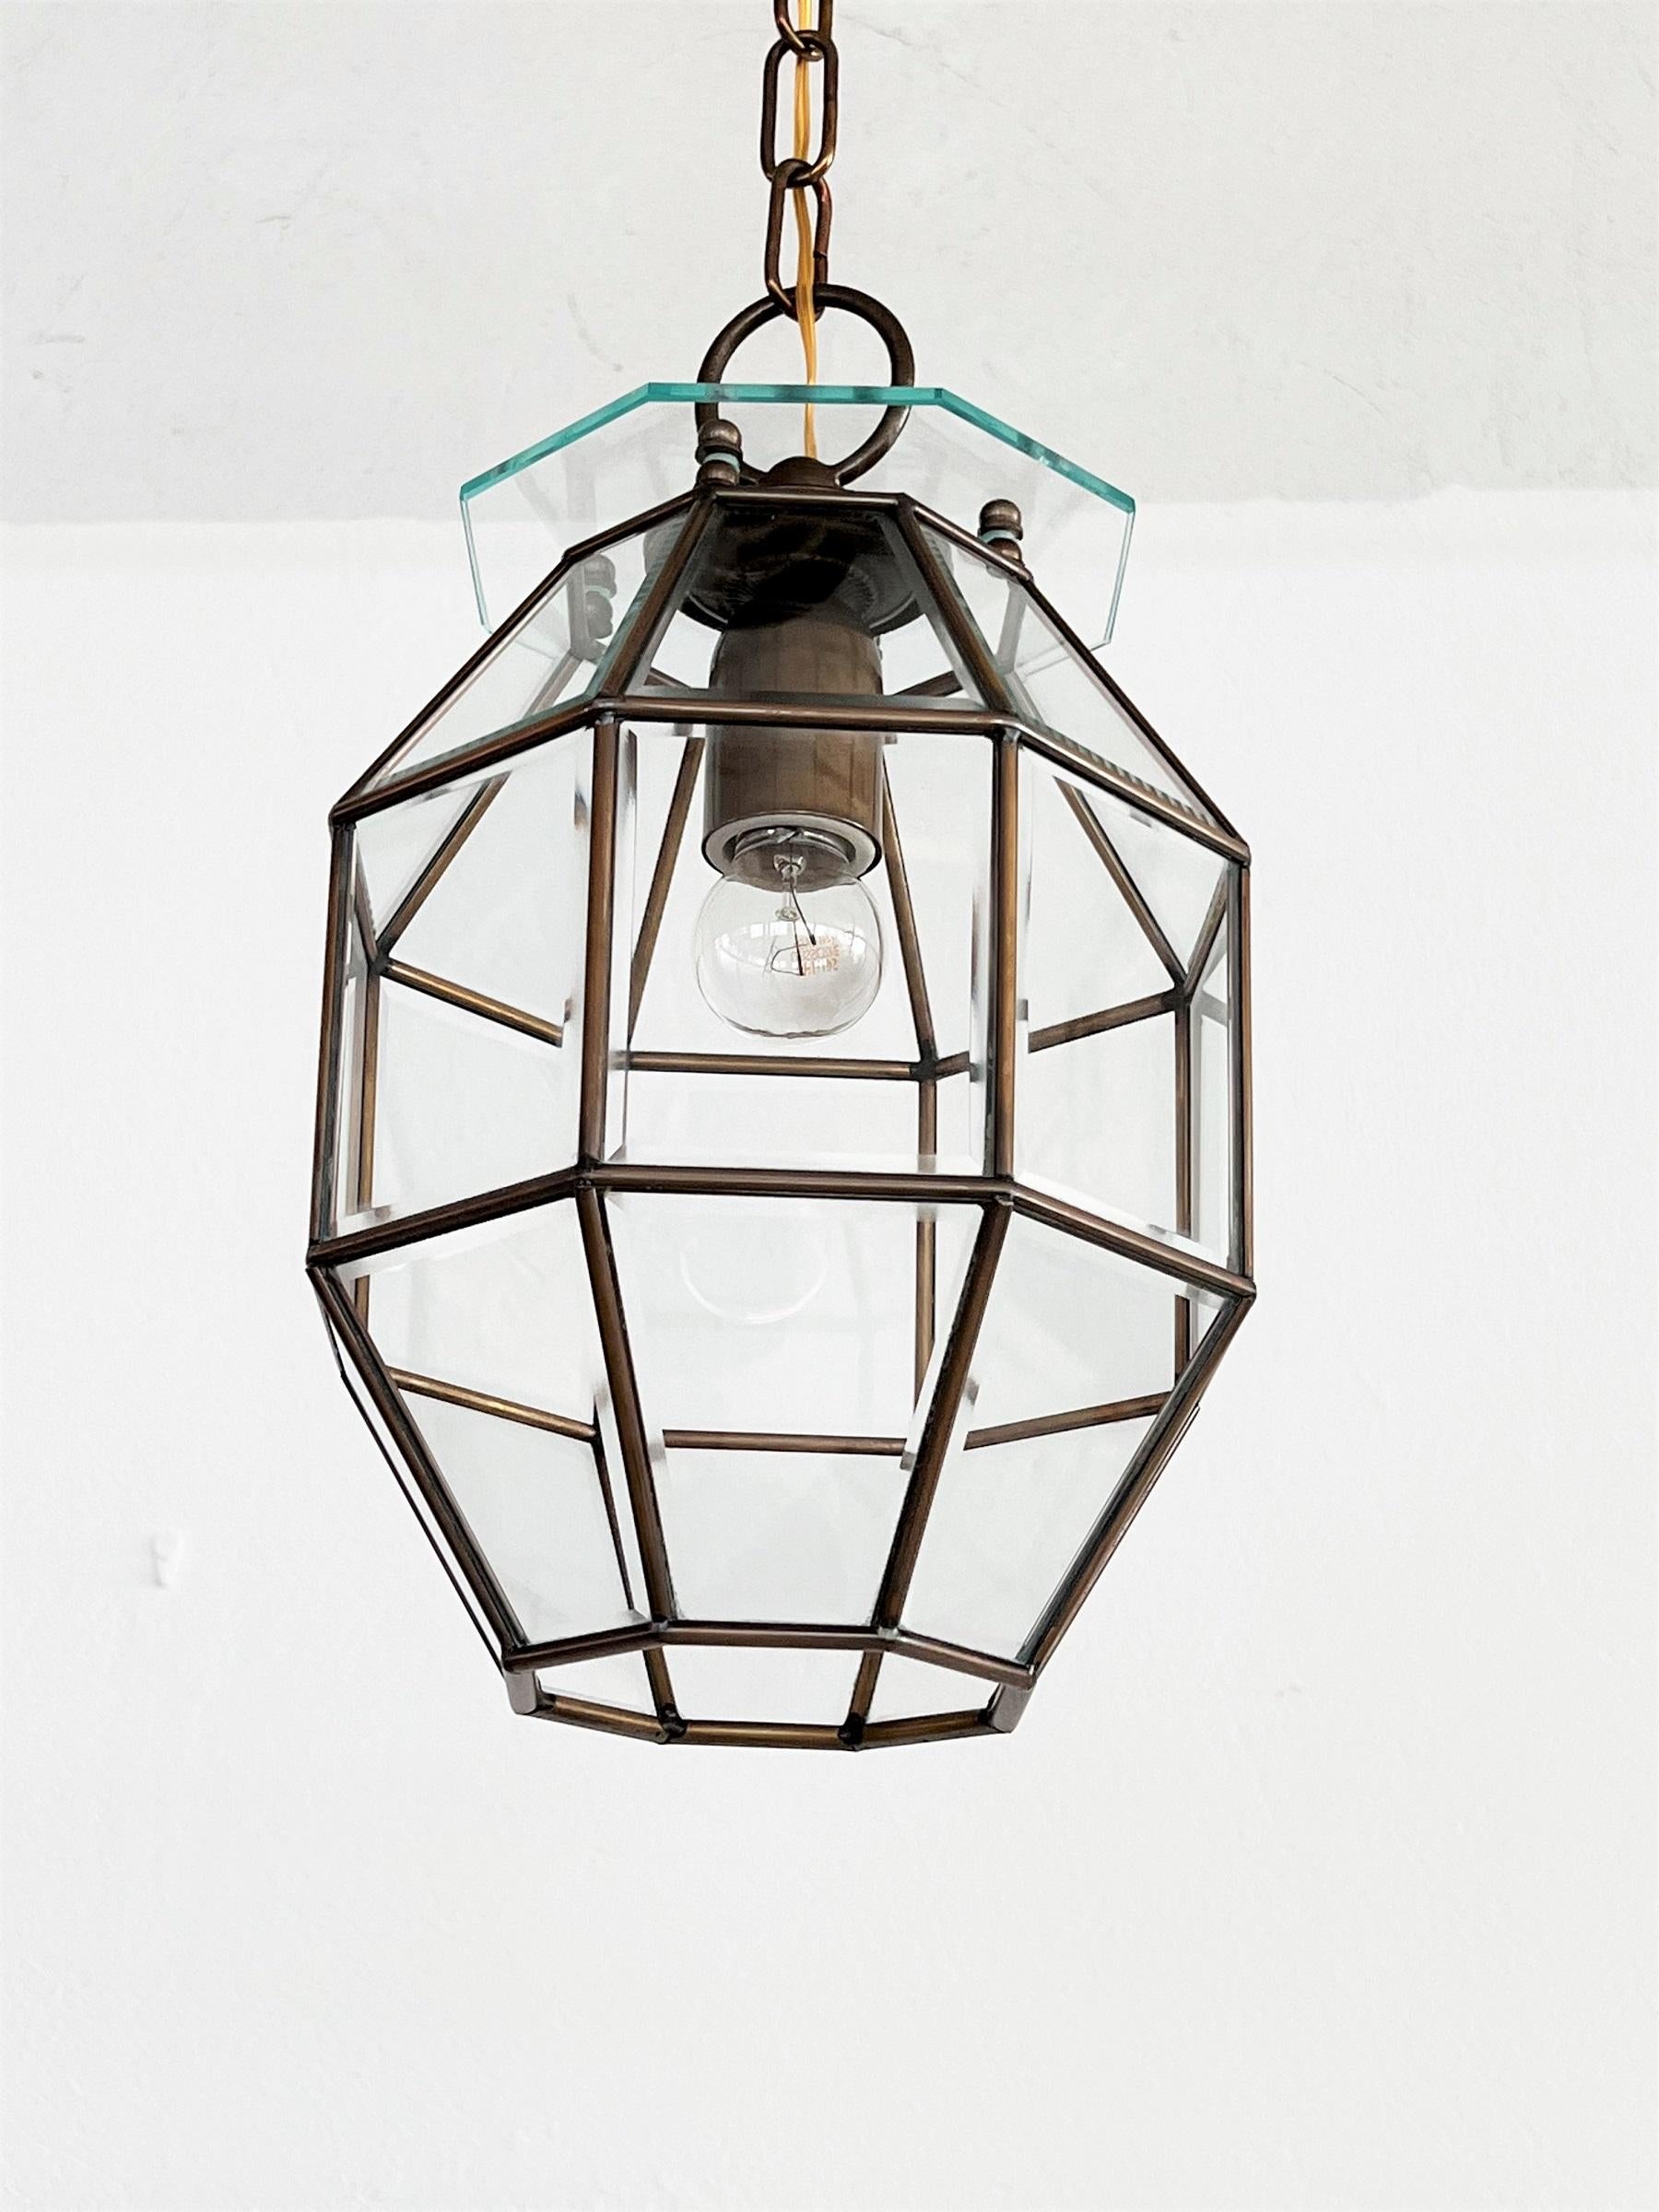 Beautiful lantern or pendant lamp made of shiny crystal cut glass and full brass lamp frame. 
Hand-Crafted in the 1950s in Italy.
The crystal glass is very shiny and the brass has its original dark patina from the past years.
Makes beautiful